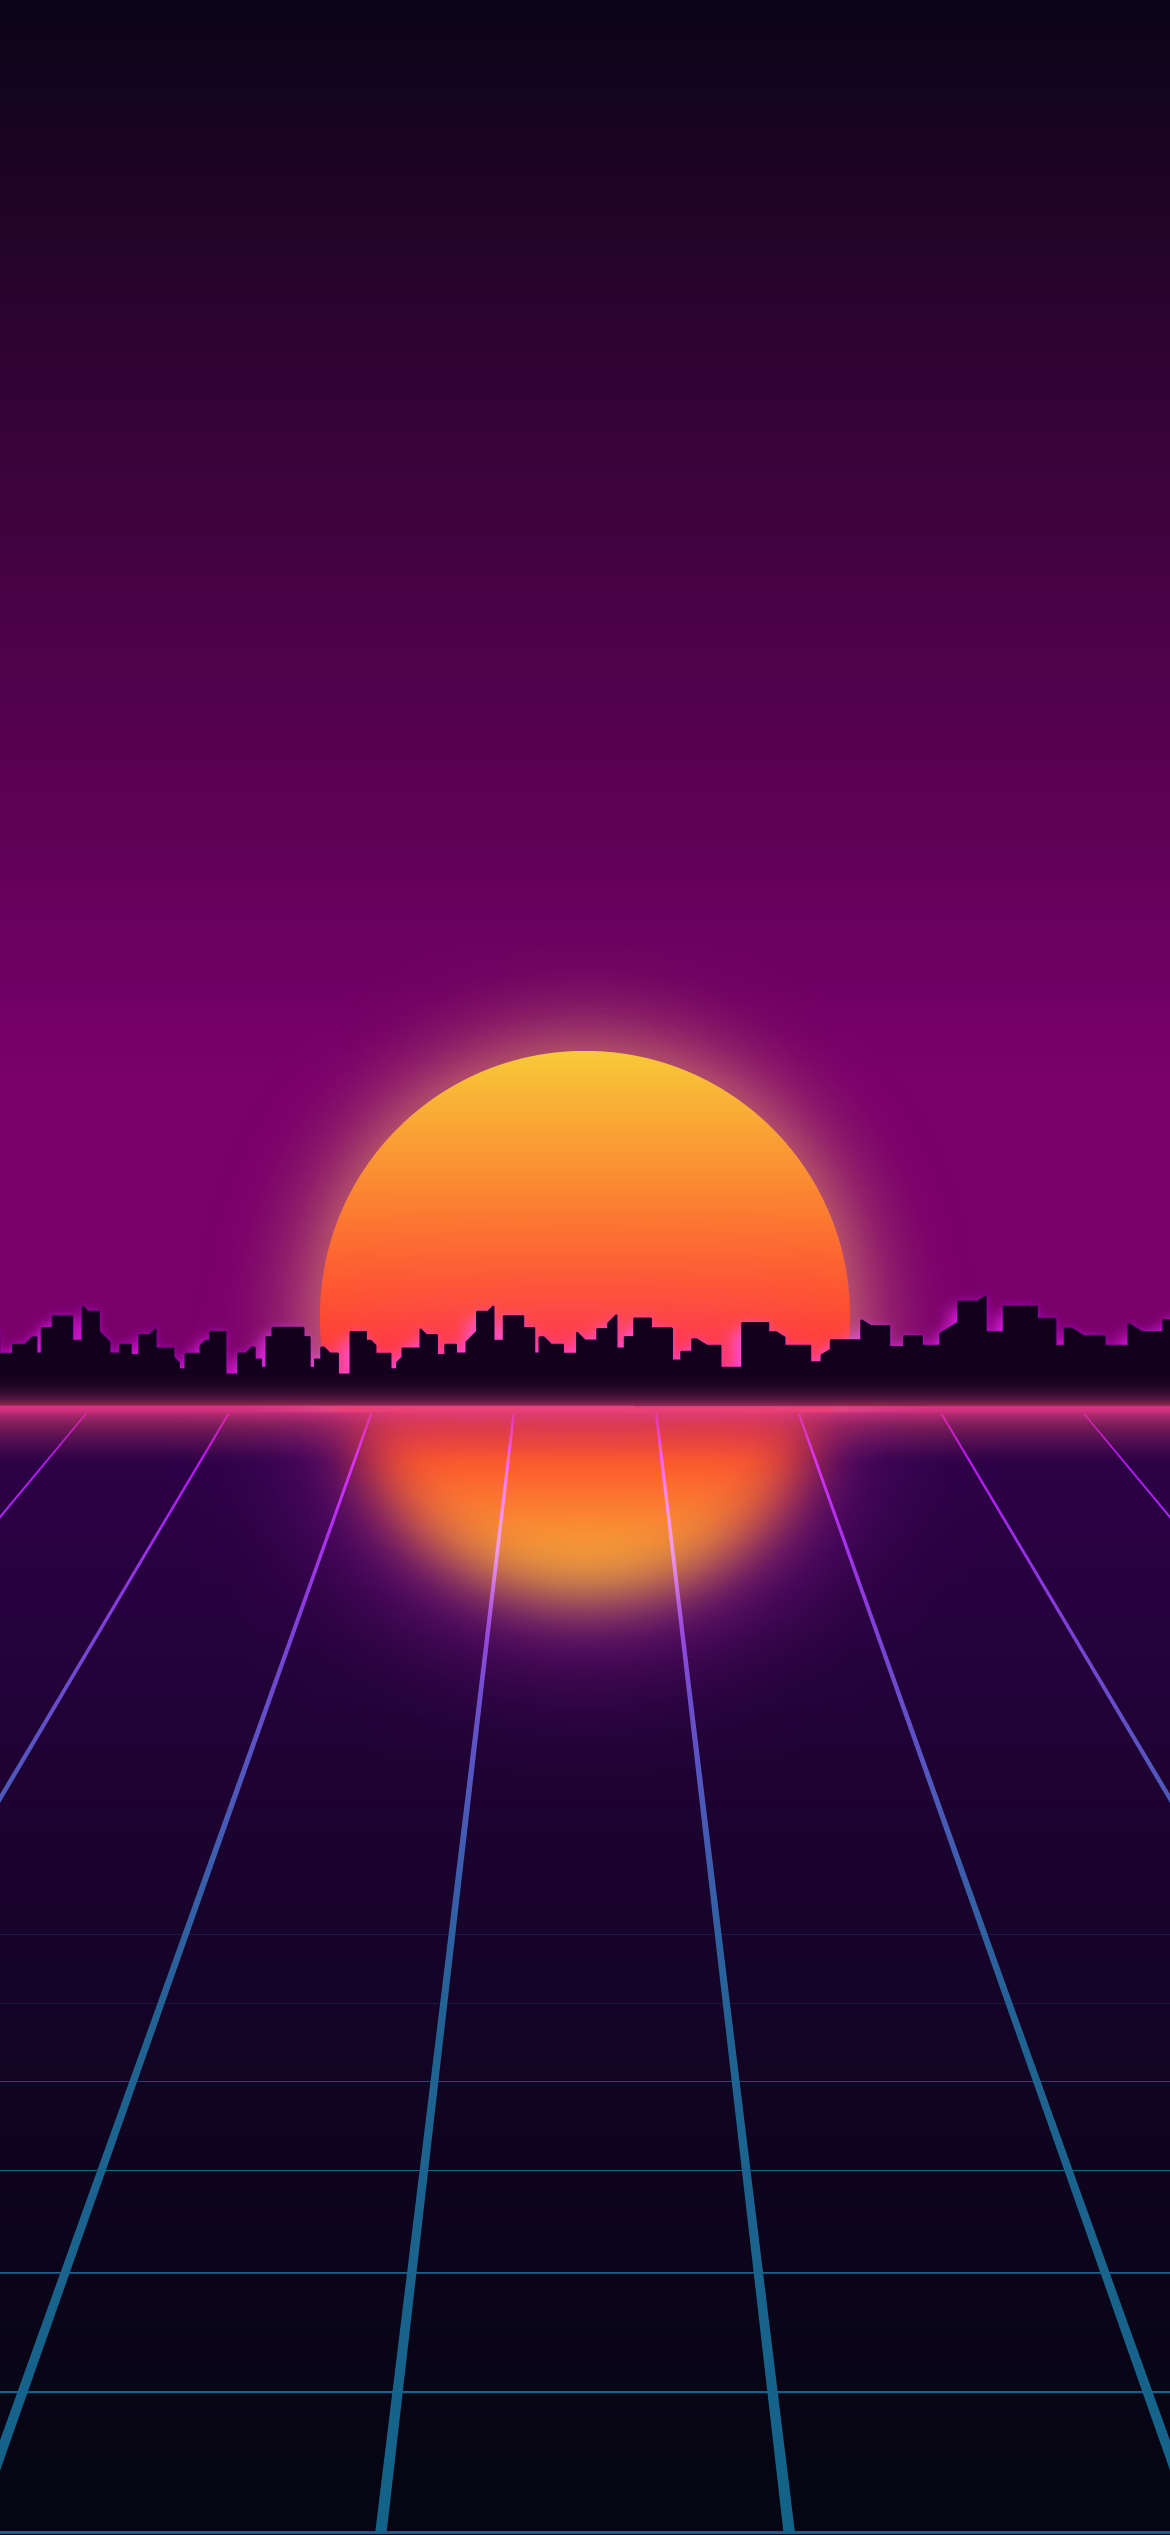 Synthwave 80s Type Retro City Neon Lights  Live HD Wallpaper 1HOUR   YouTube